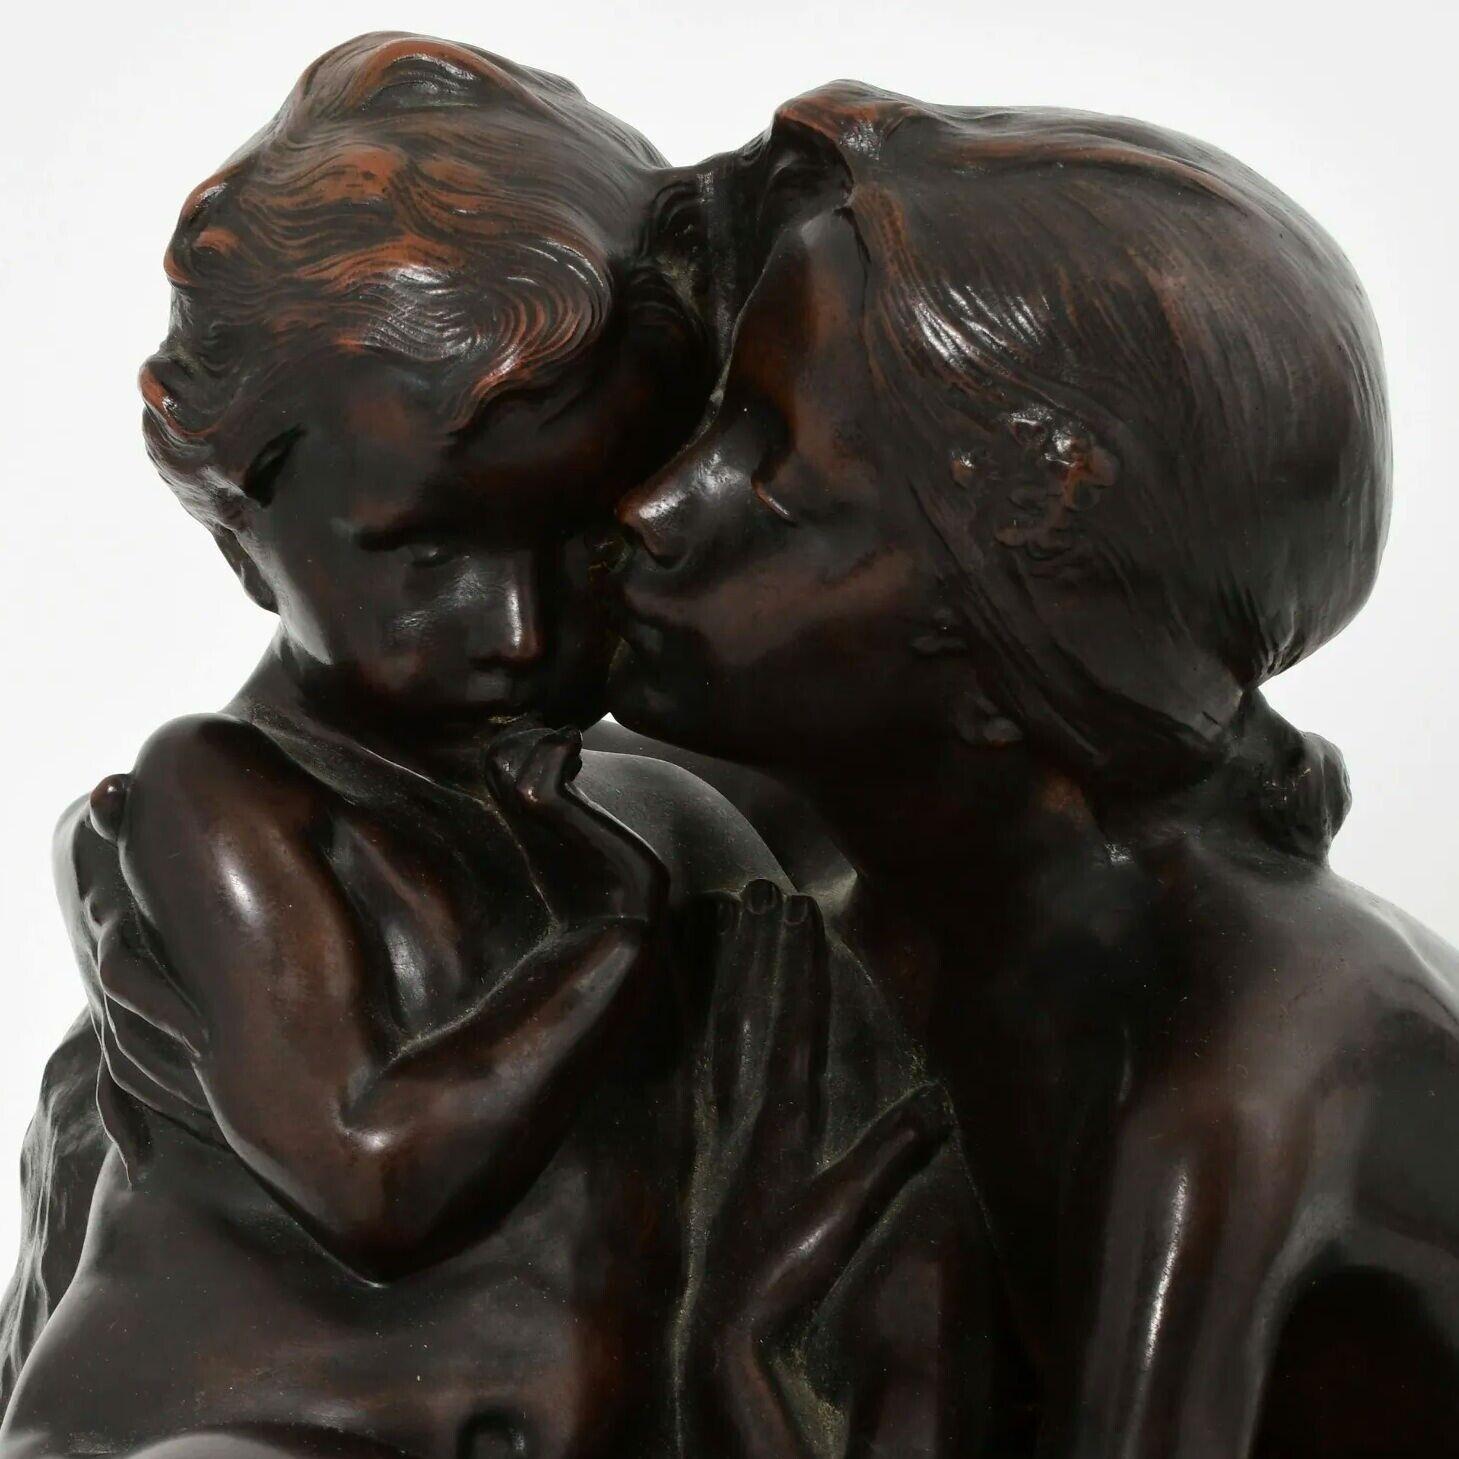 Antique French Bronze Sculpture of Sisters by Henri Pernot (1859-1937) 2